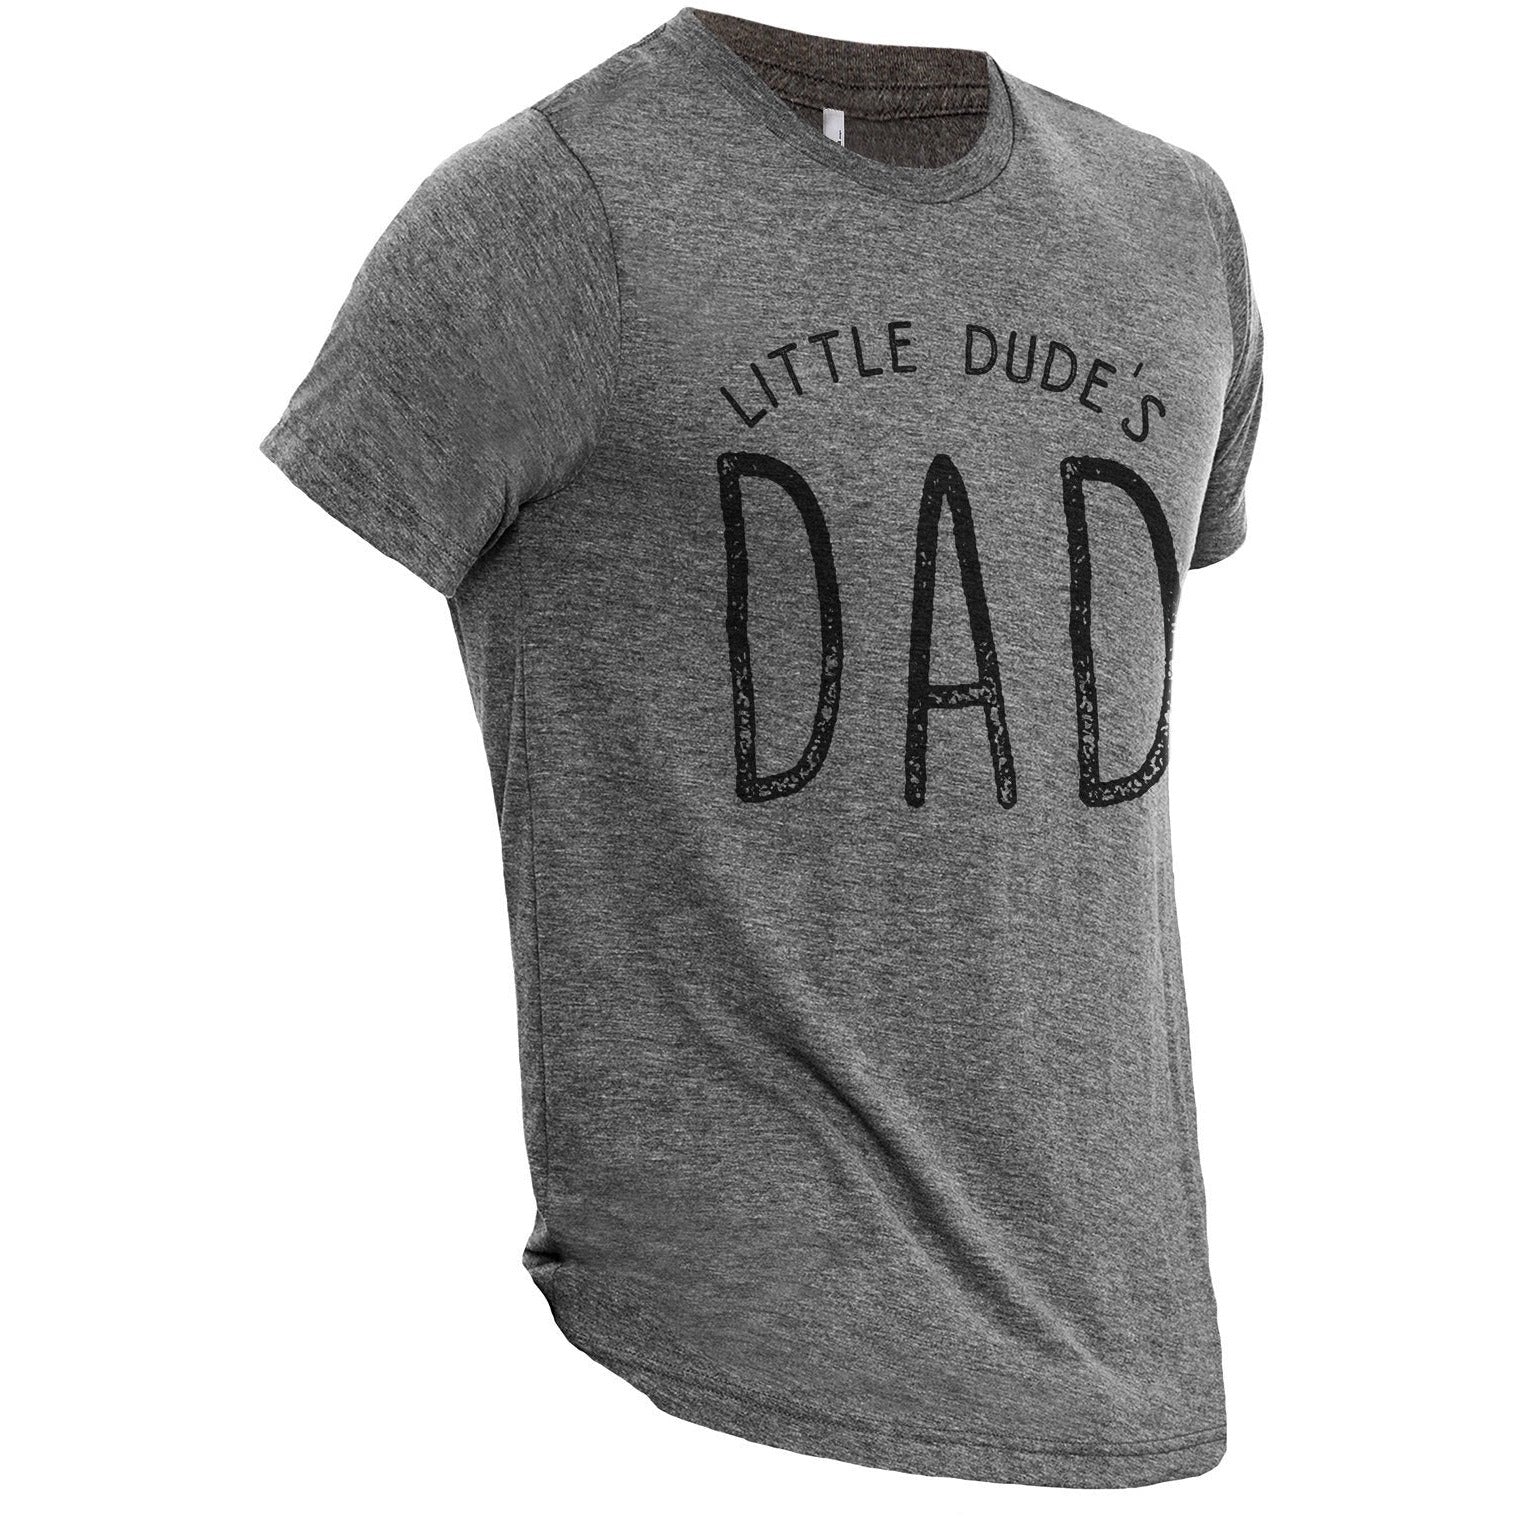 Lil Dude's Dad Heather Grey Printed Graphic Men's Crew T-Shirt Tee Side View